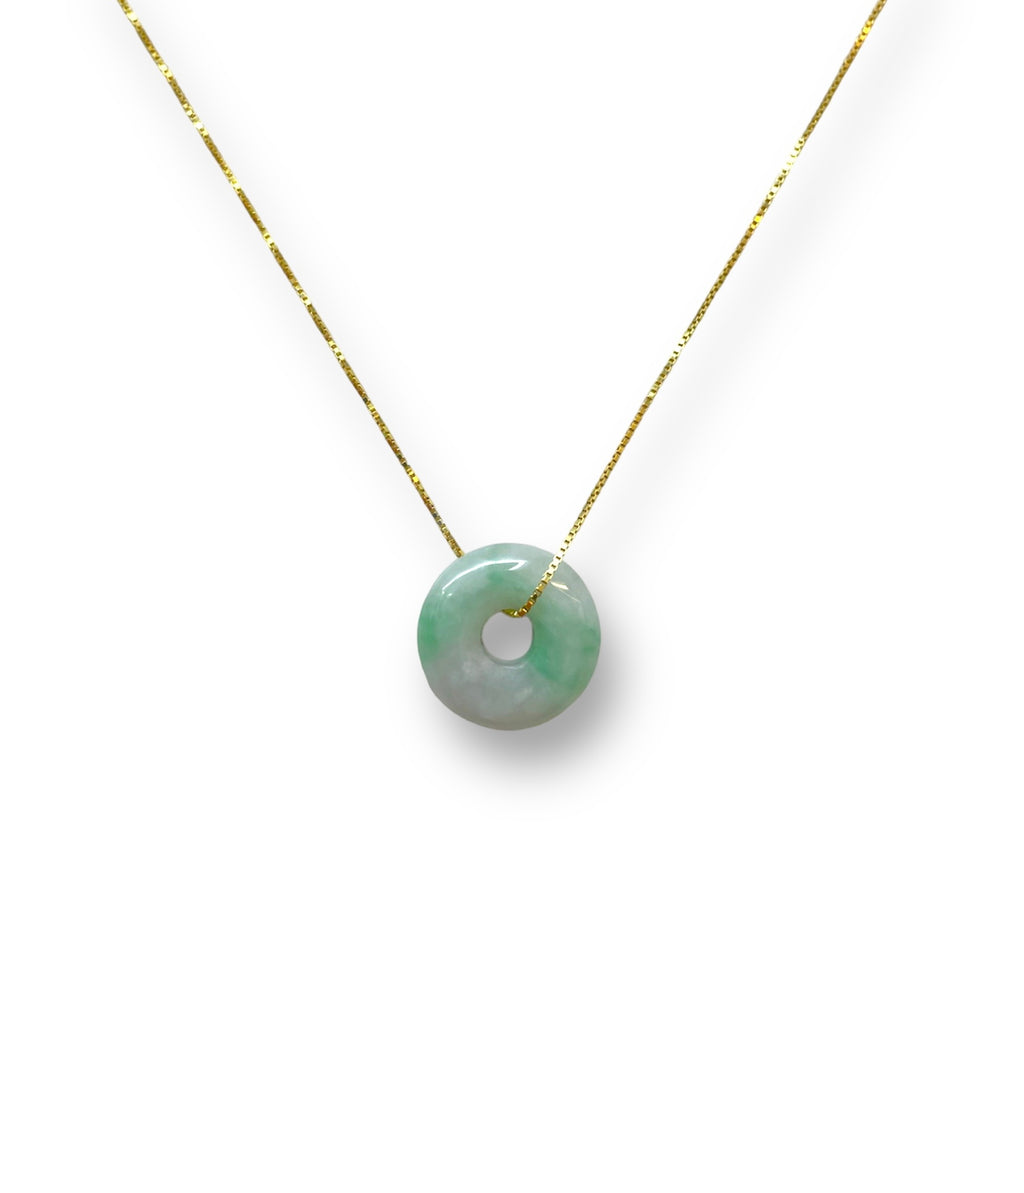 The Forever Jade Necklace